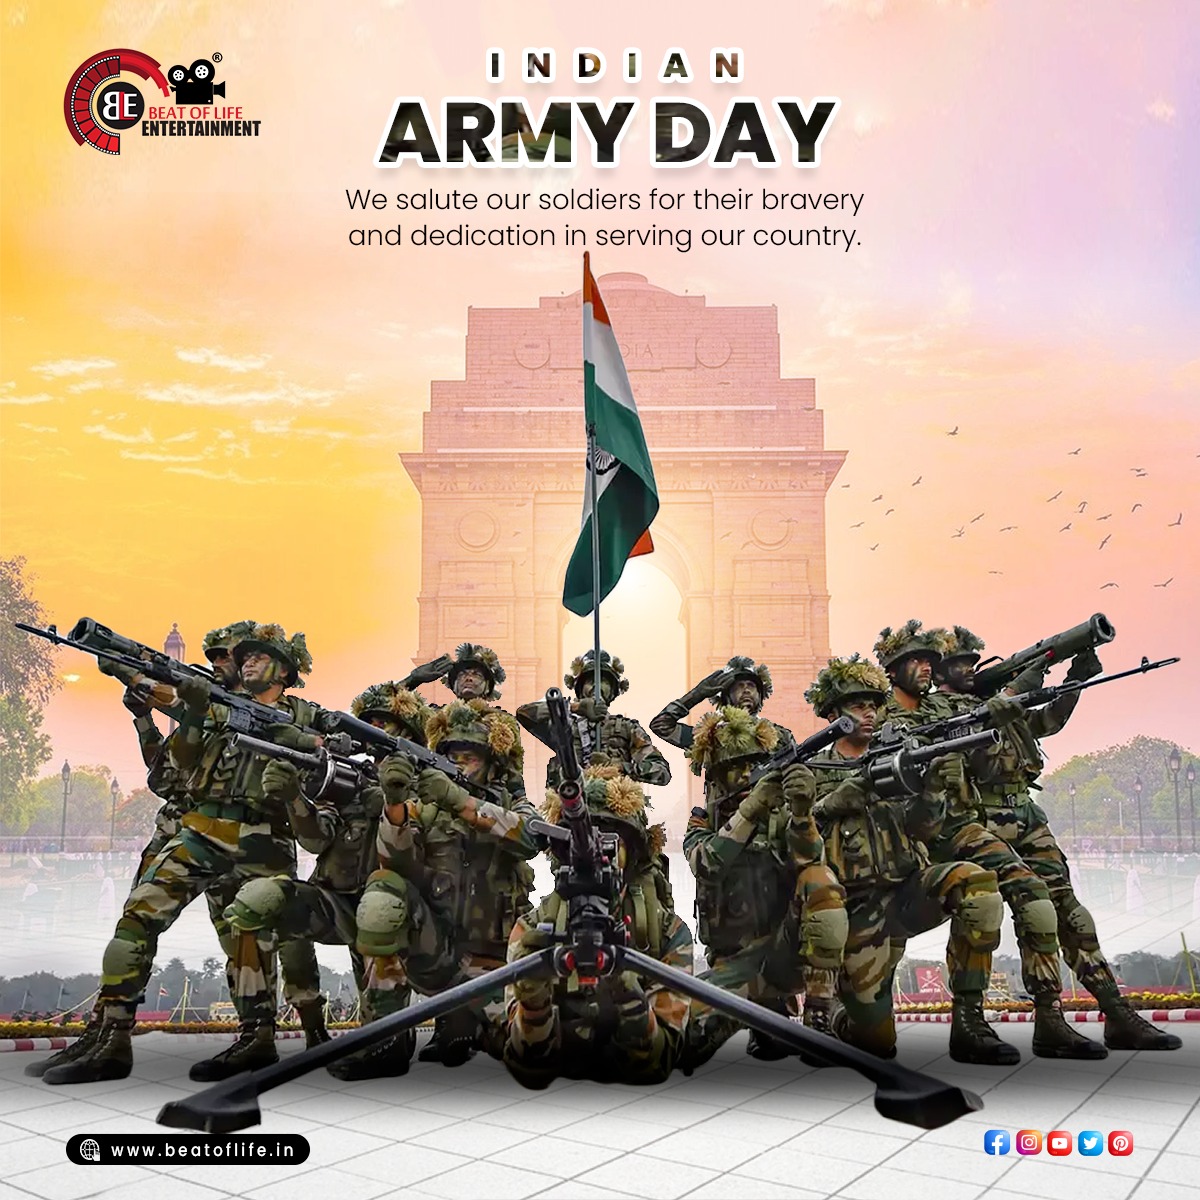 Indian Army Day - Beat of Life Entertainment